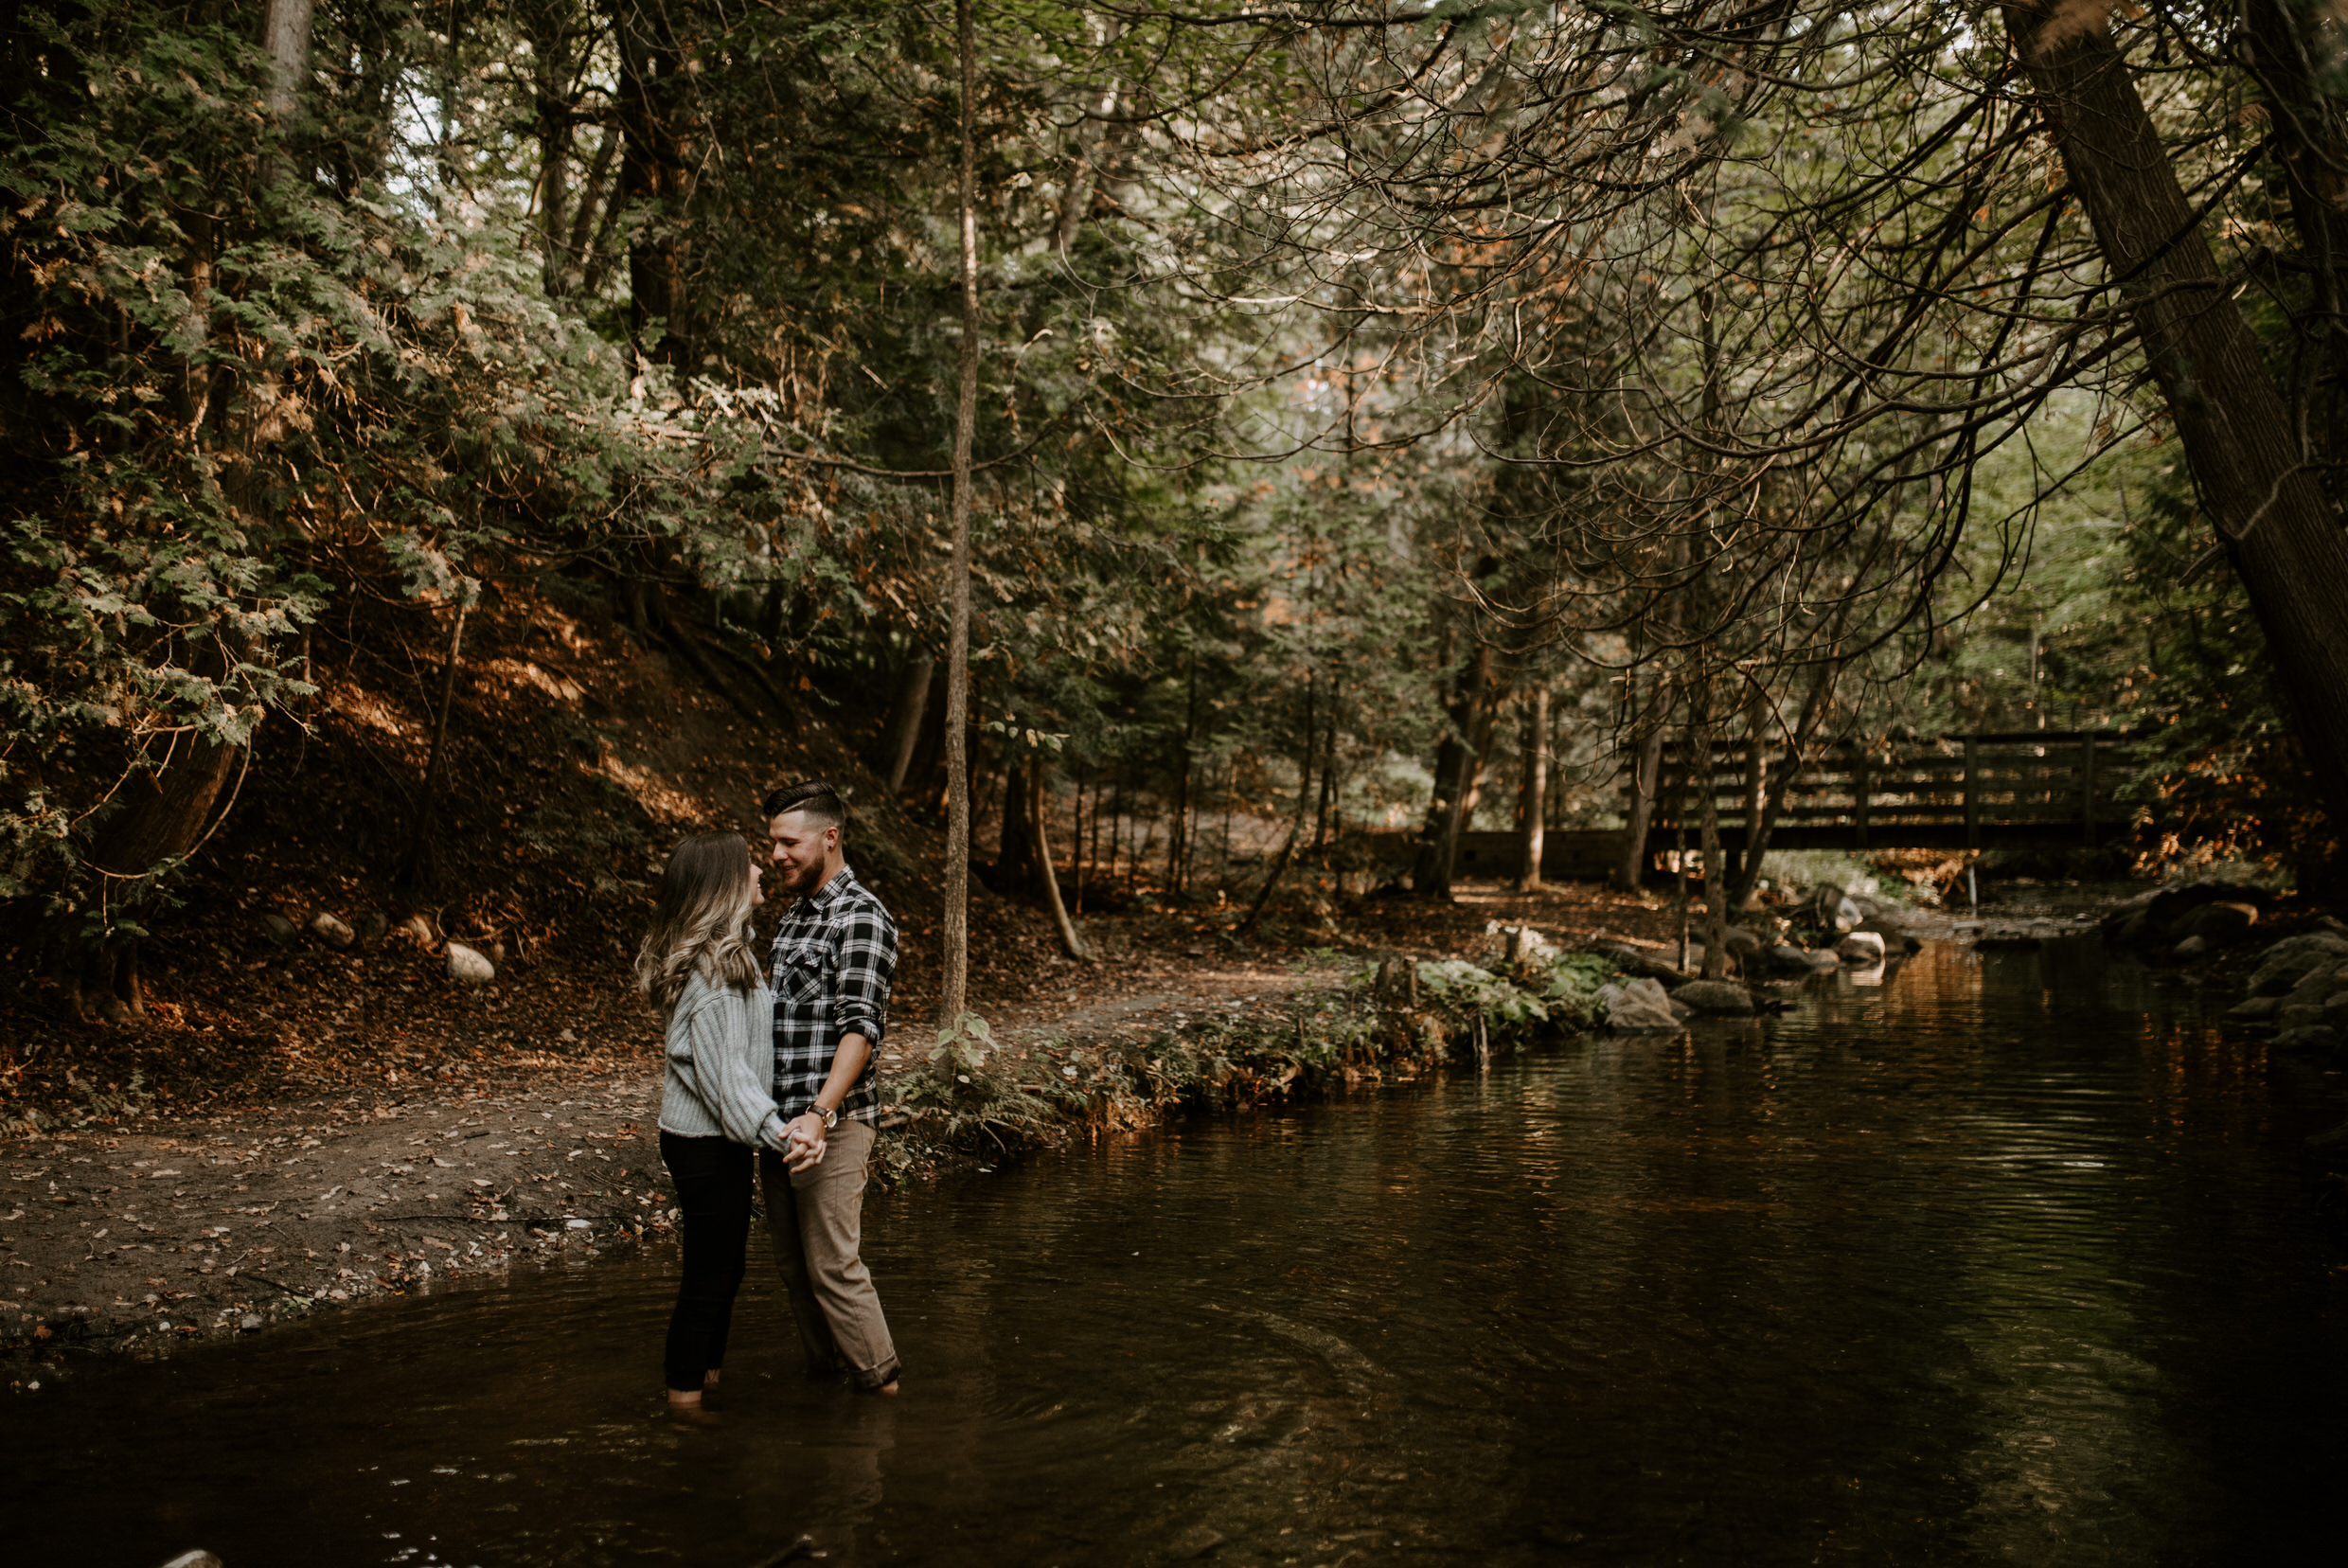 Muskoka Engagement Session - holding hands in the river